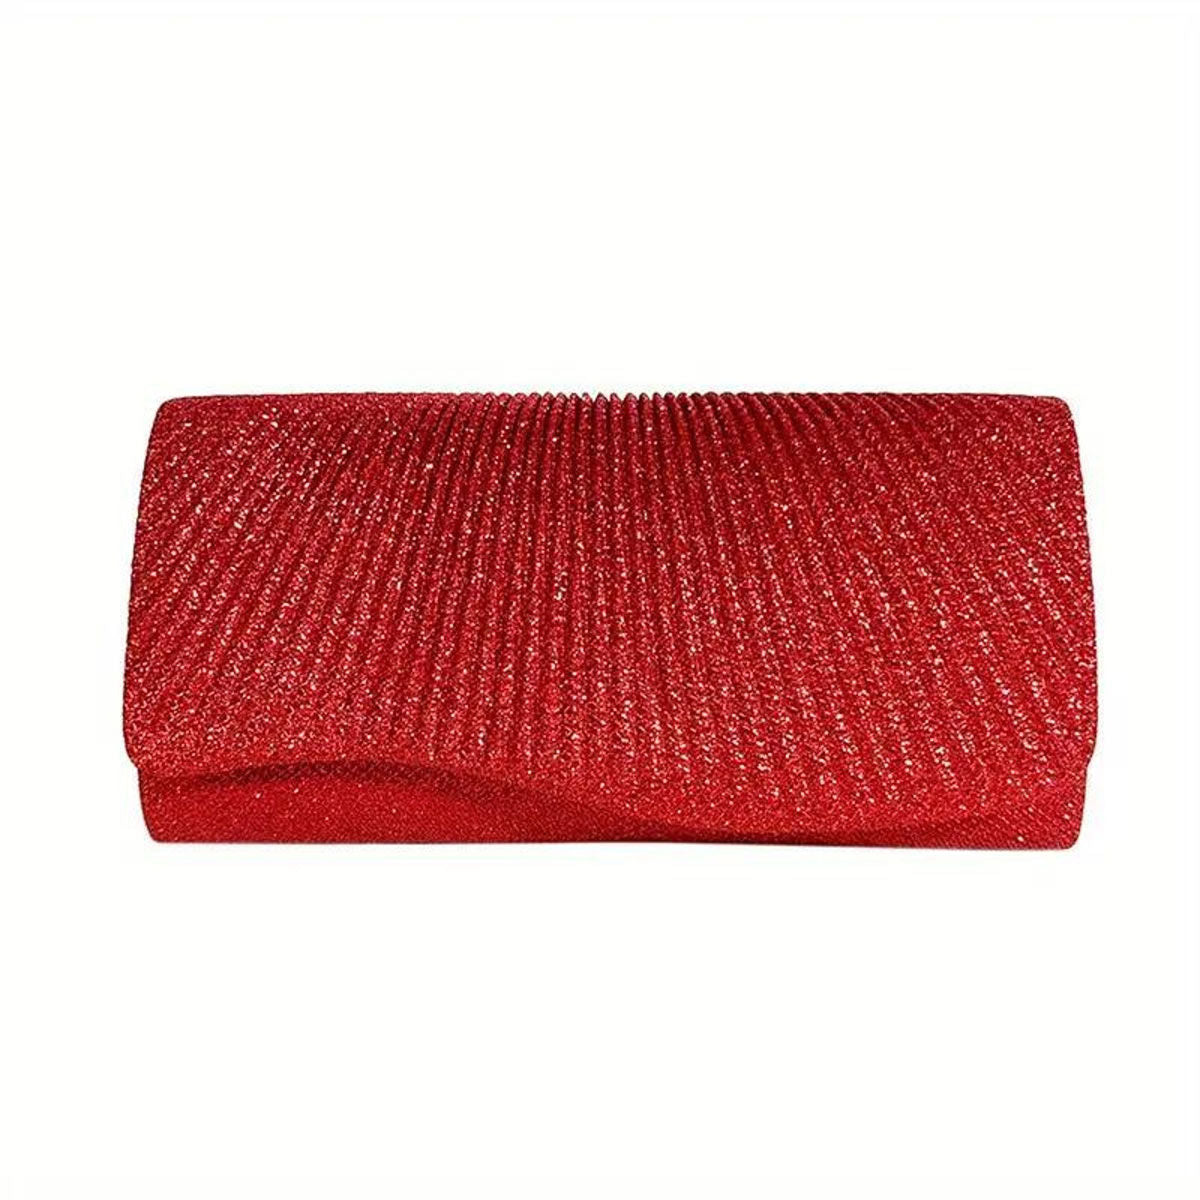 Clutch Red Ruched Evening Bag for Women